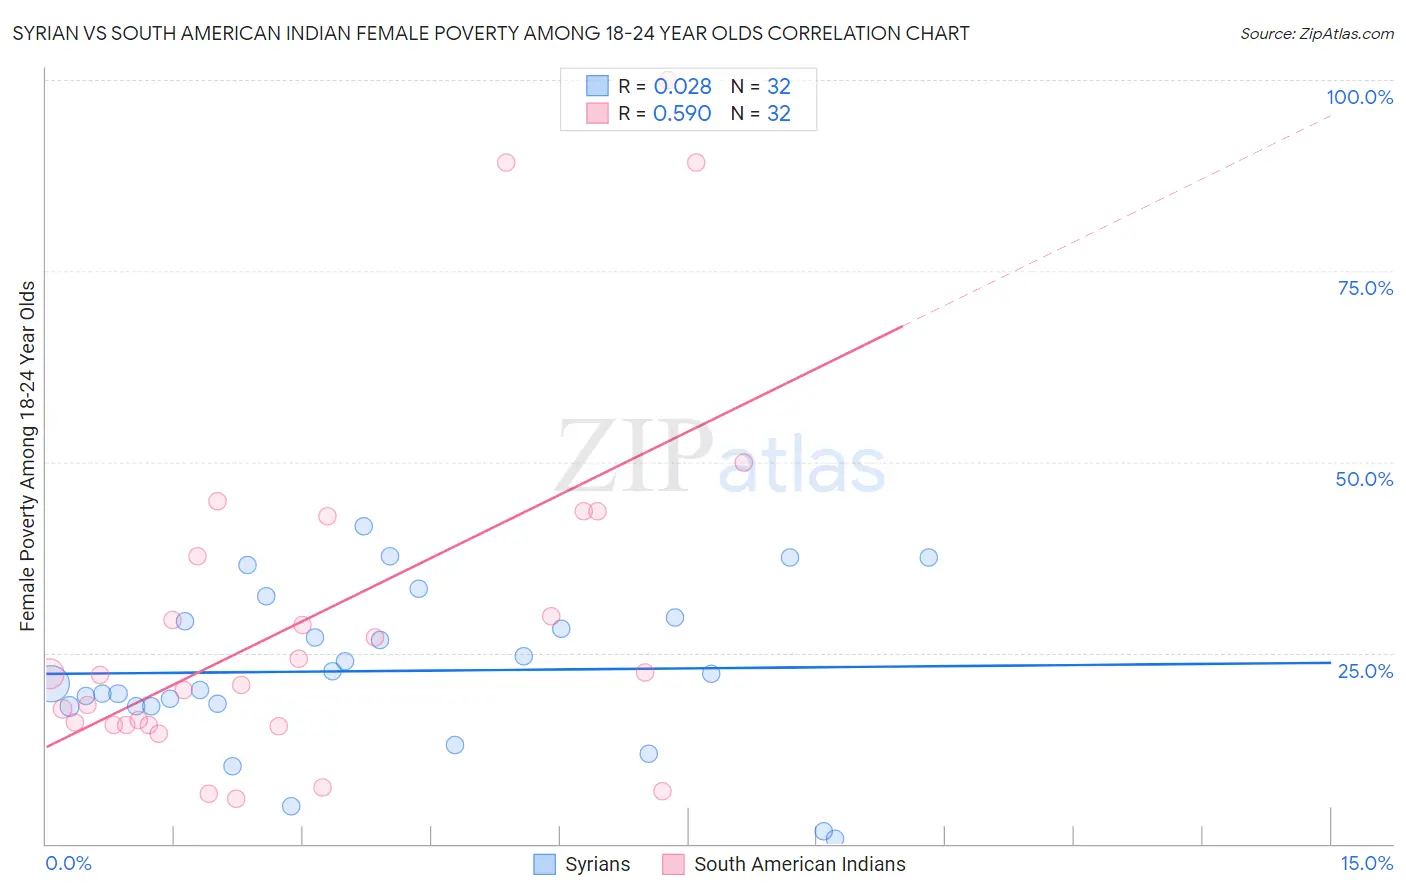 Syrian vs South American Indian Female Poverty Among 18-24 Year Olds